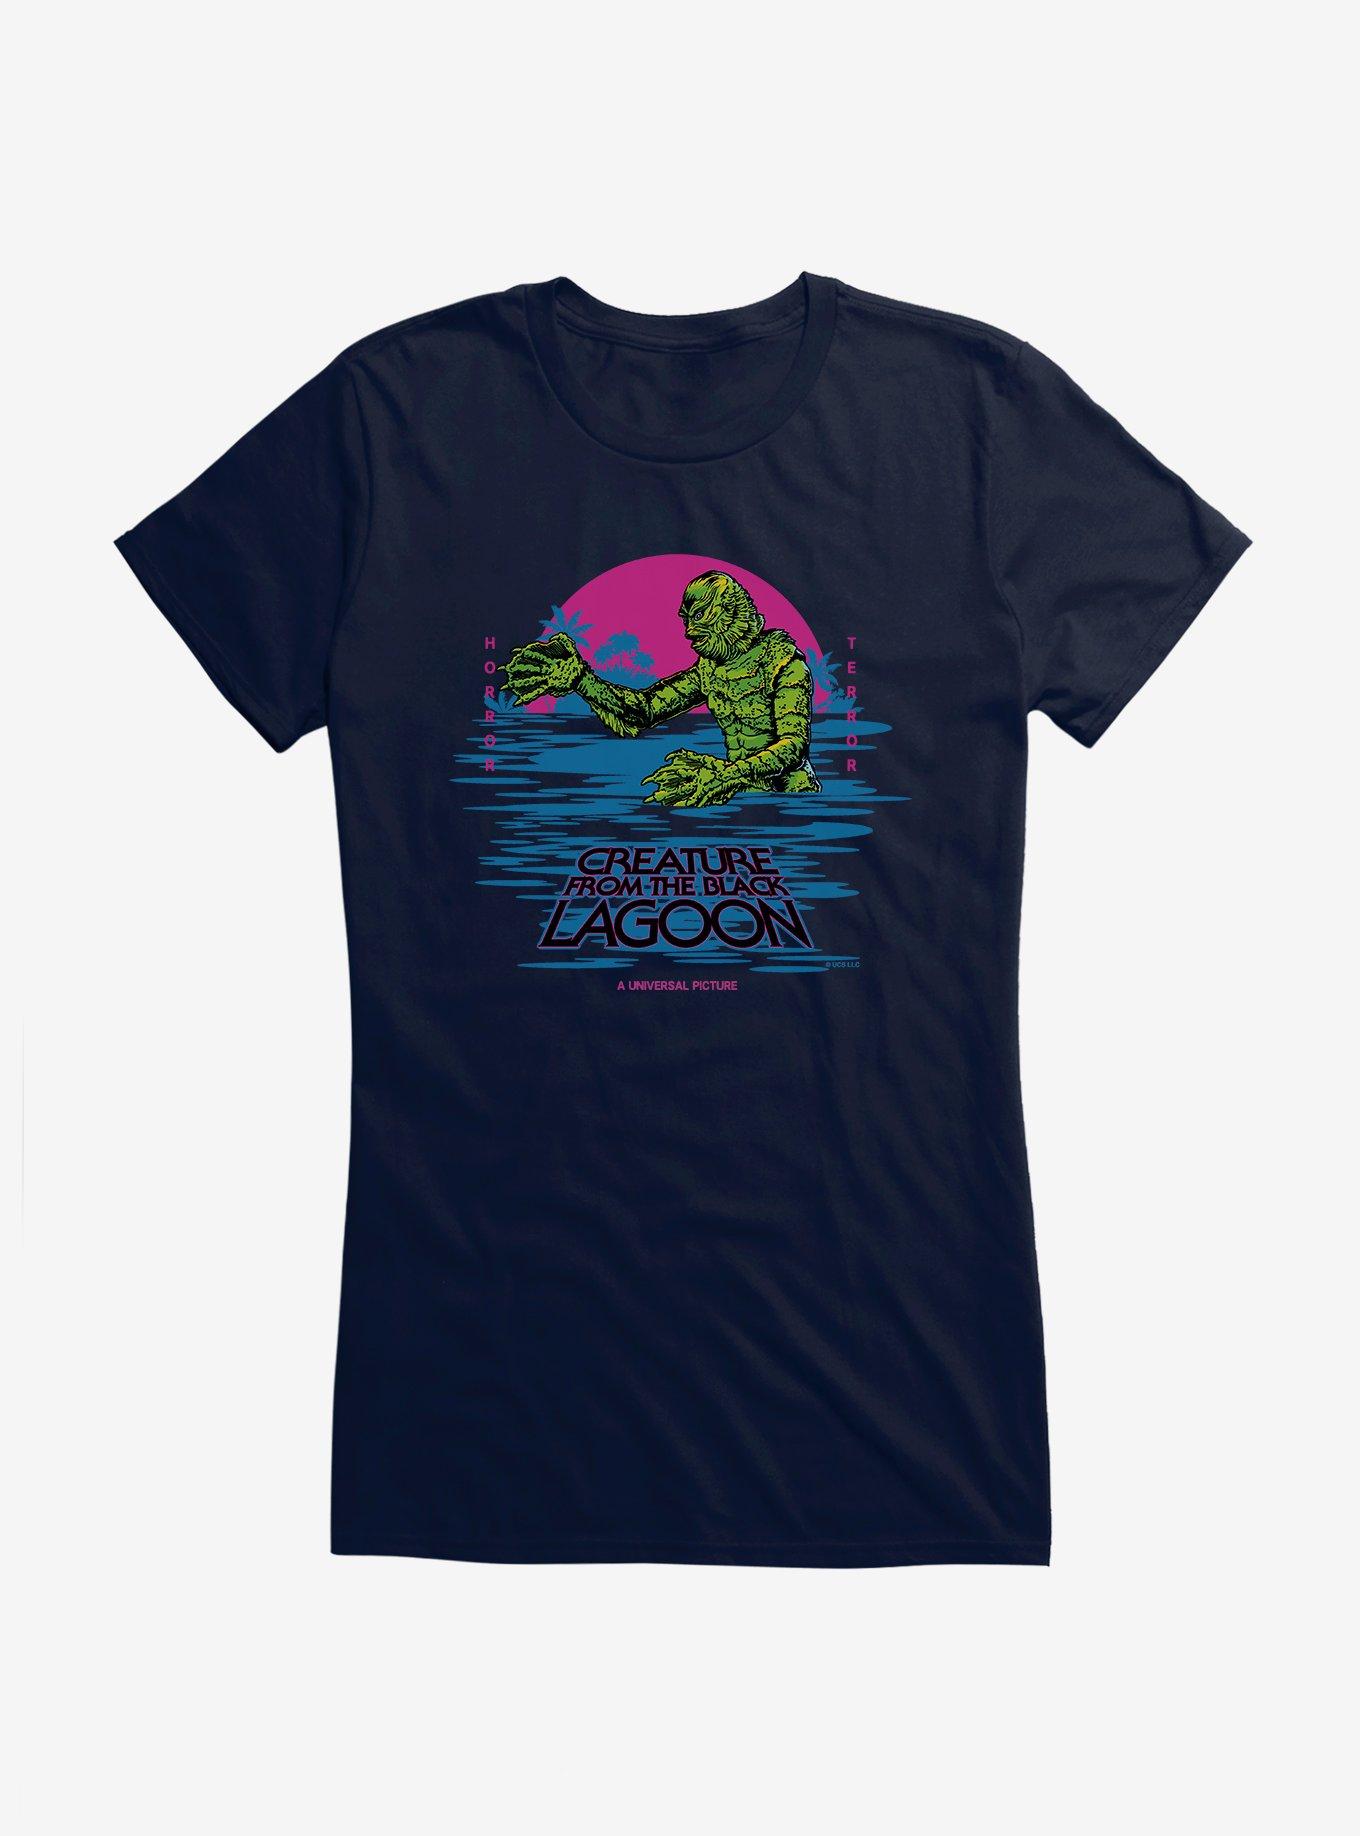 Creature From The Black Lagoon Pastel Title Art Girls T-Shirt, NAVY, hi-res